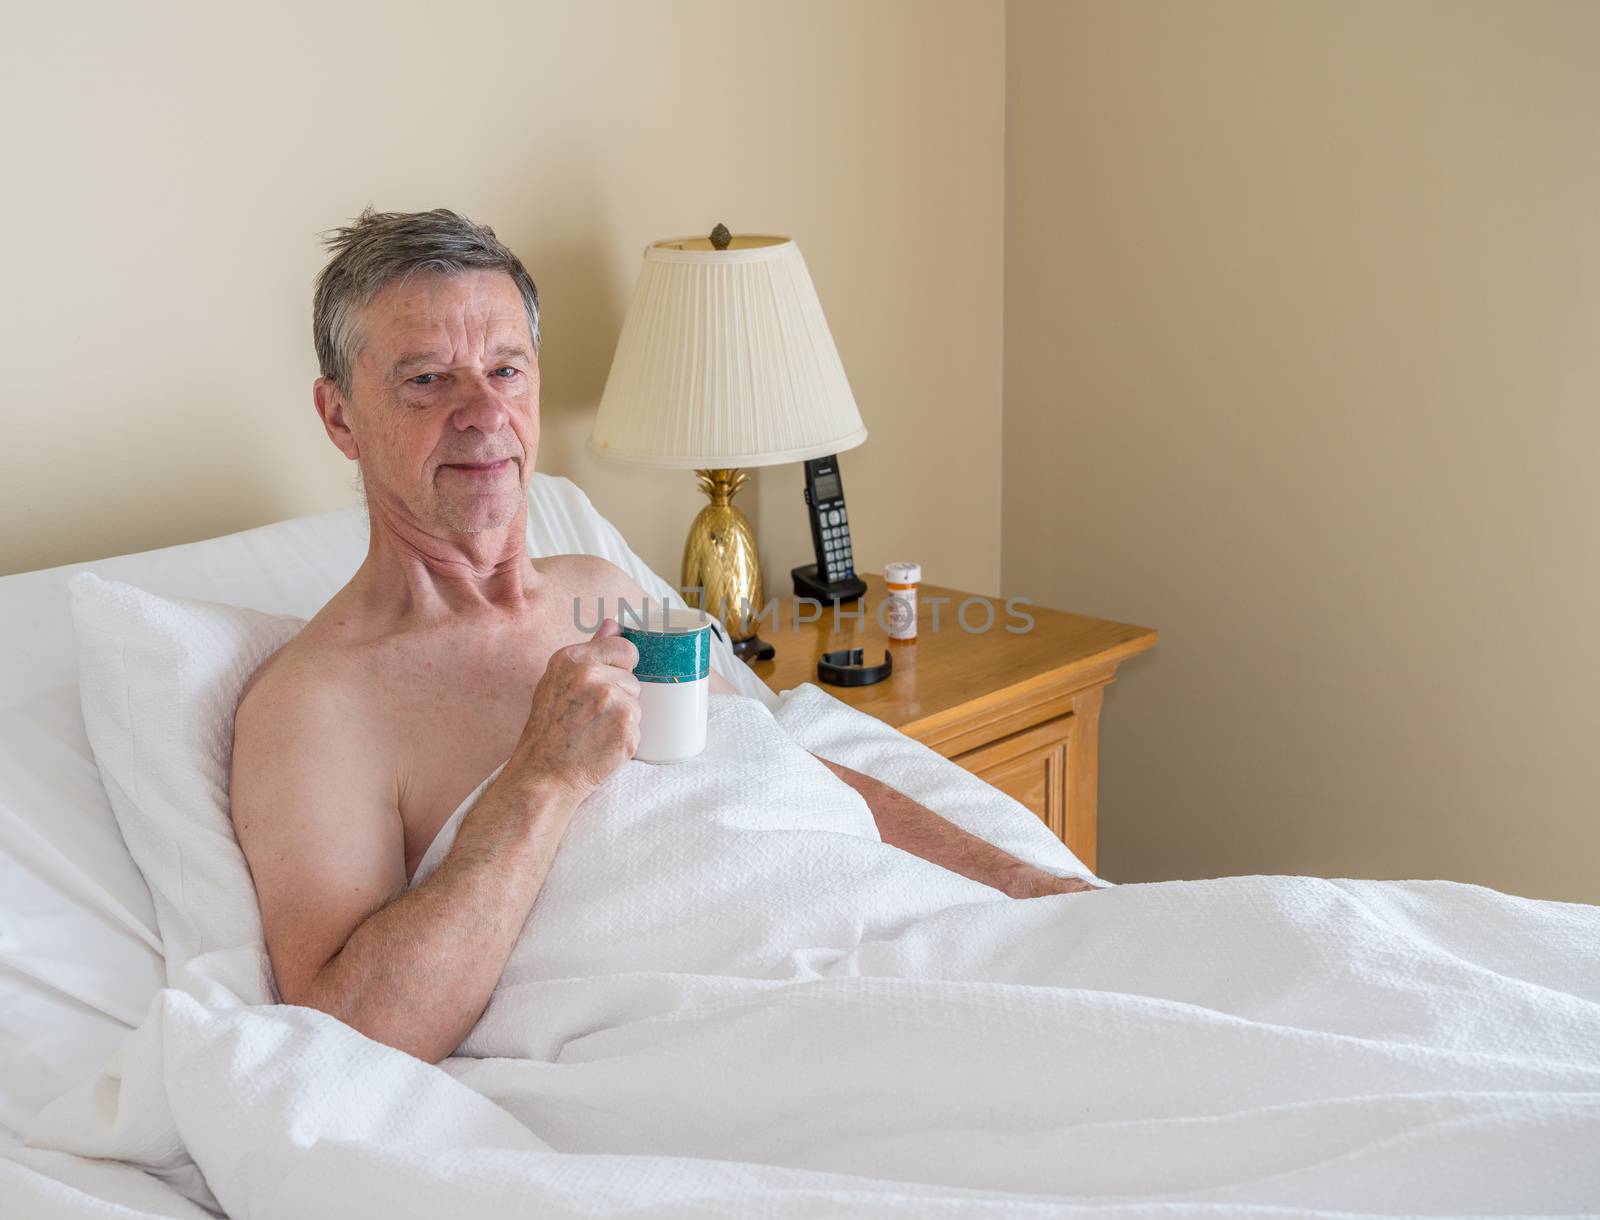 Senior retired caucasian man lying in adjustable bed on incline. He has a cup of coffee and is smiling towards the viewer